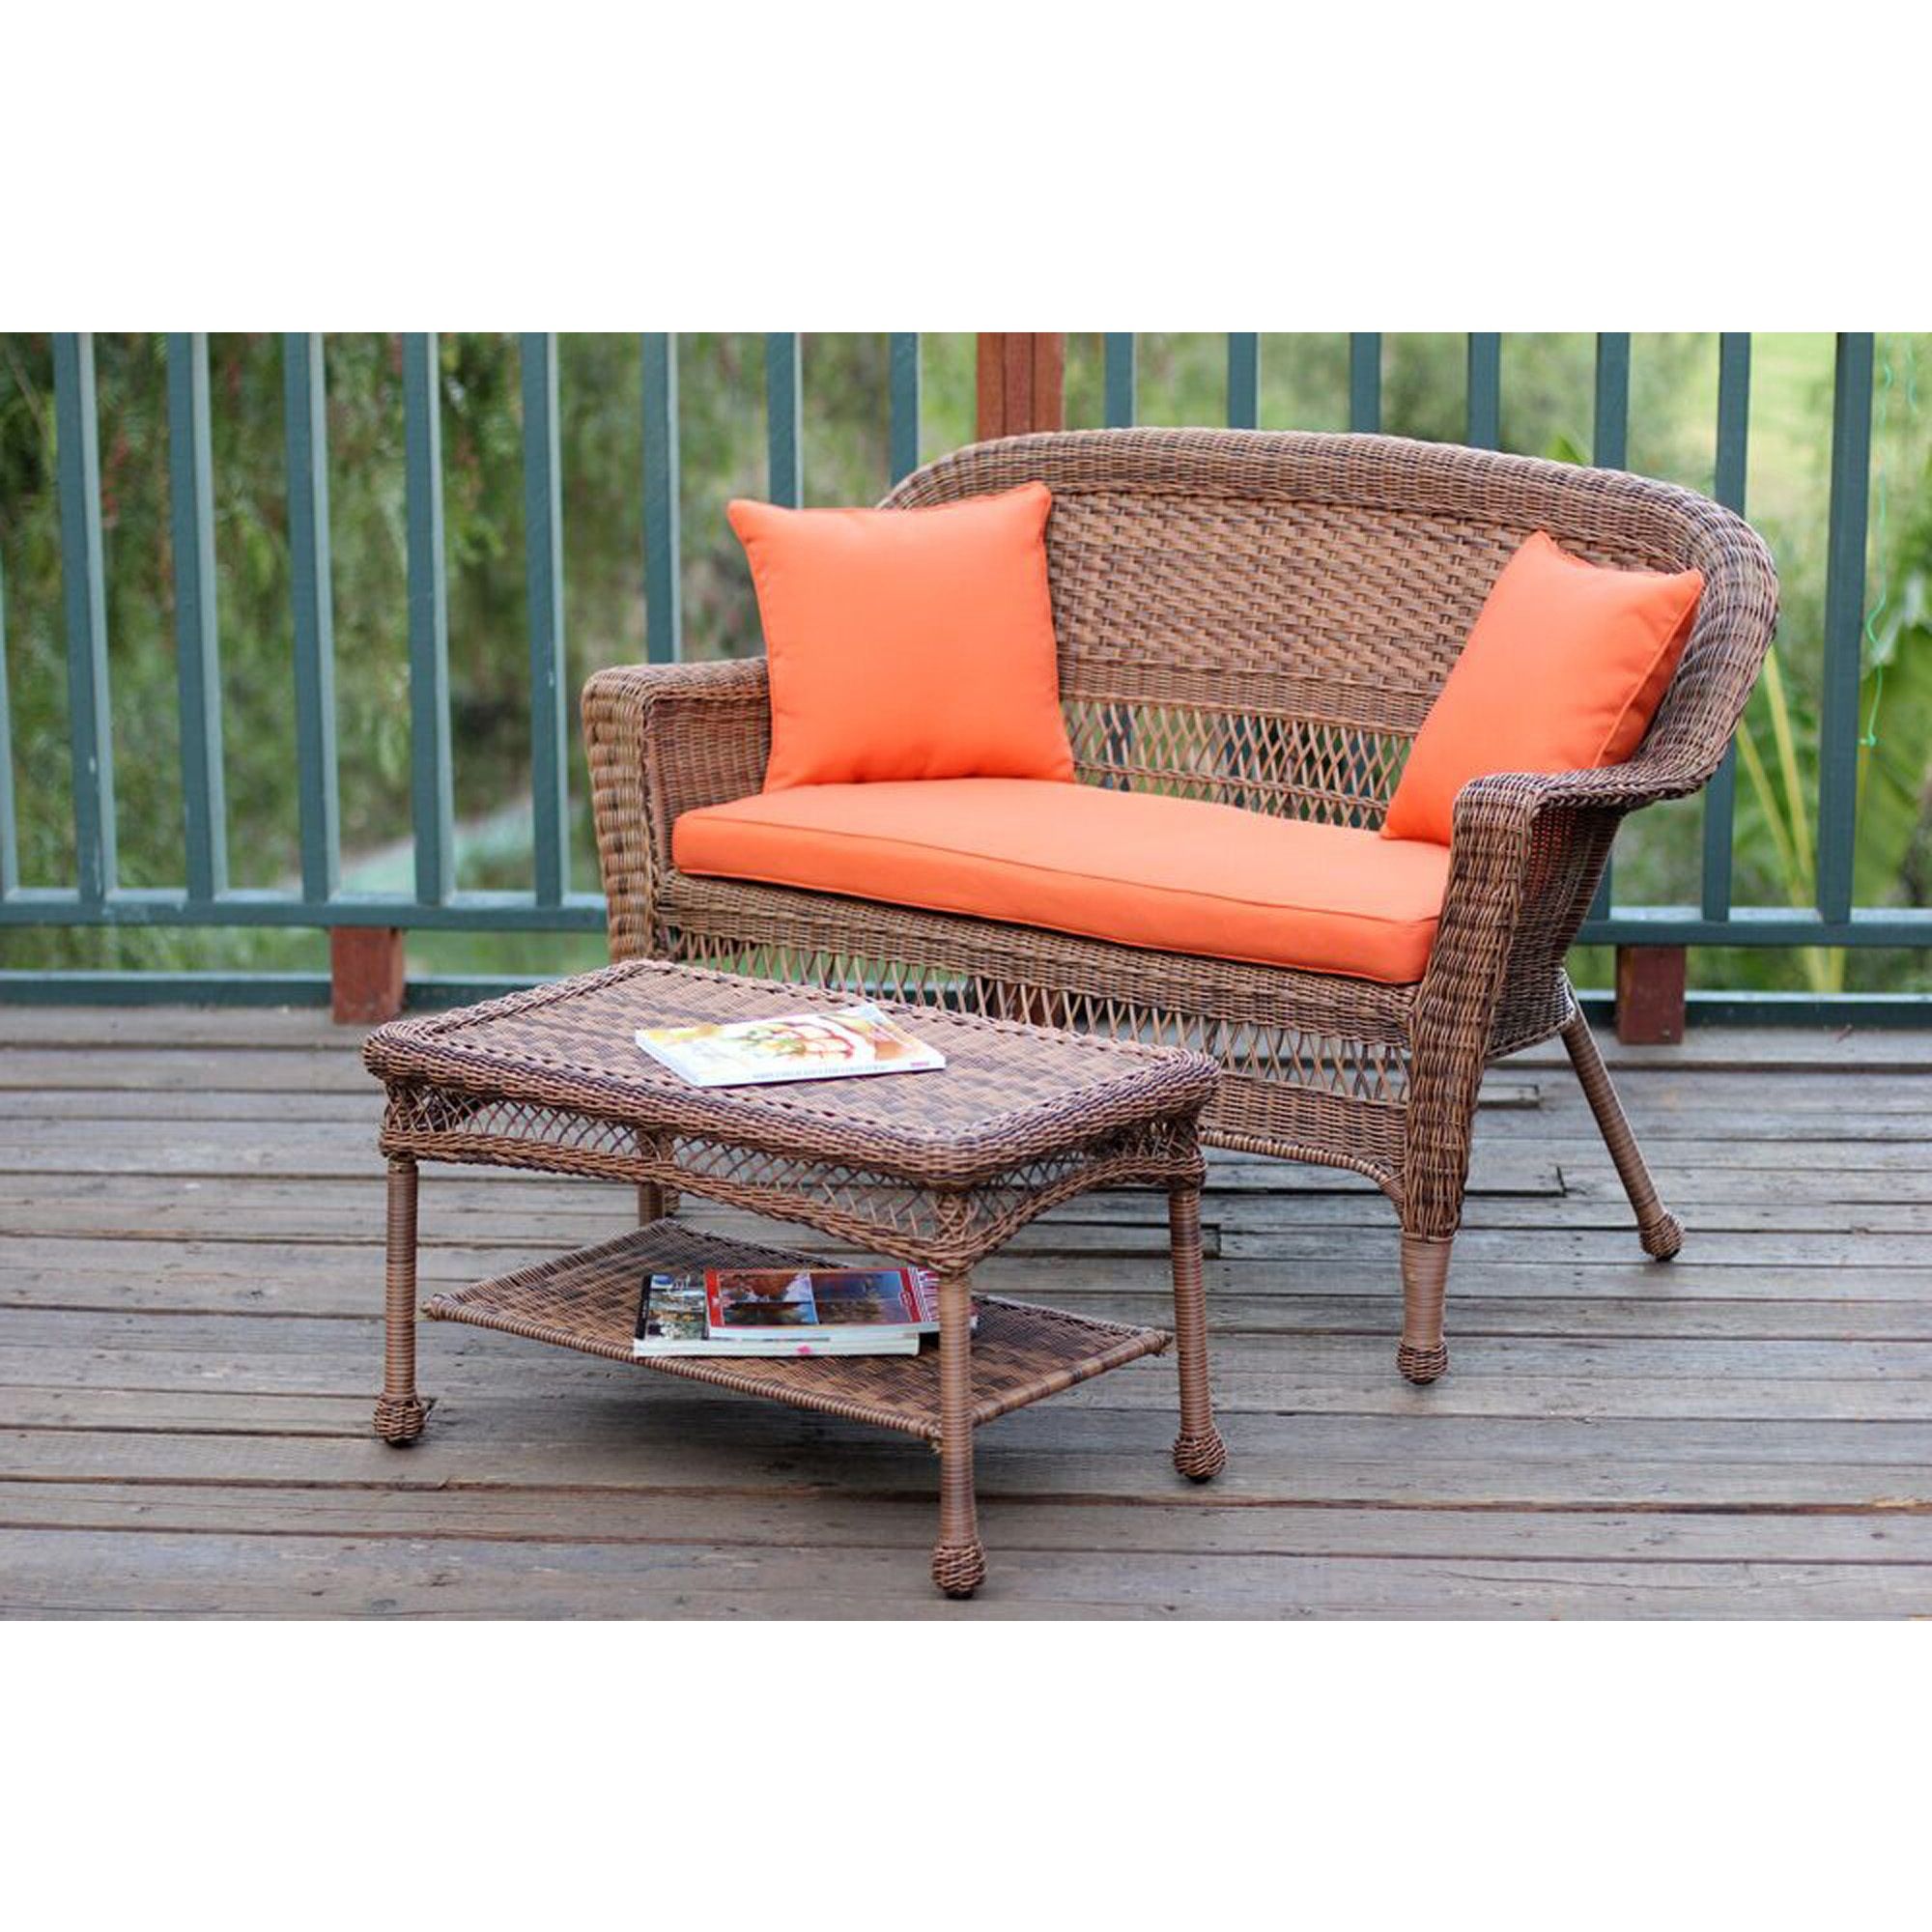 2 Piece Oswald Honey Wicker Patio Loveseat And Coffee Table Set In Outdoor Wicker Orange Cushion Patio Sets (View 3 of 15)